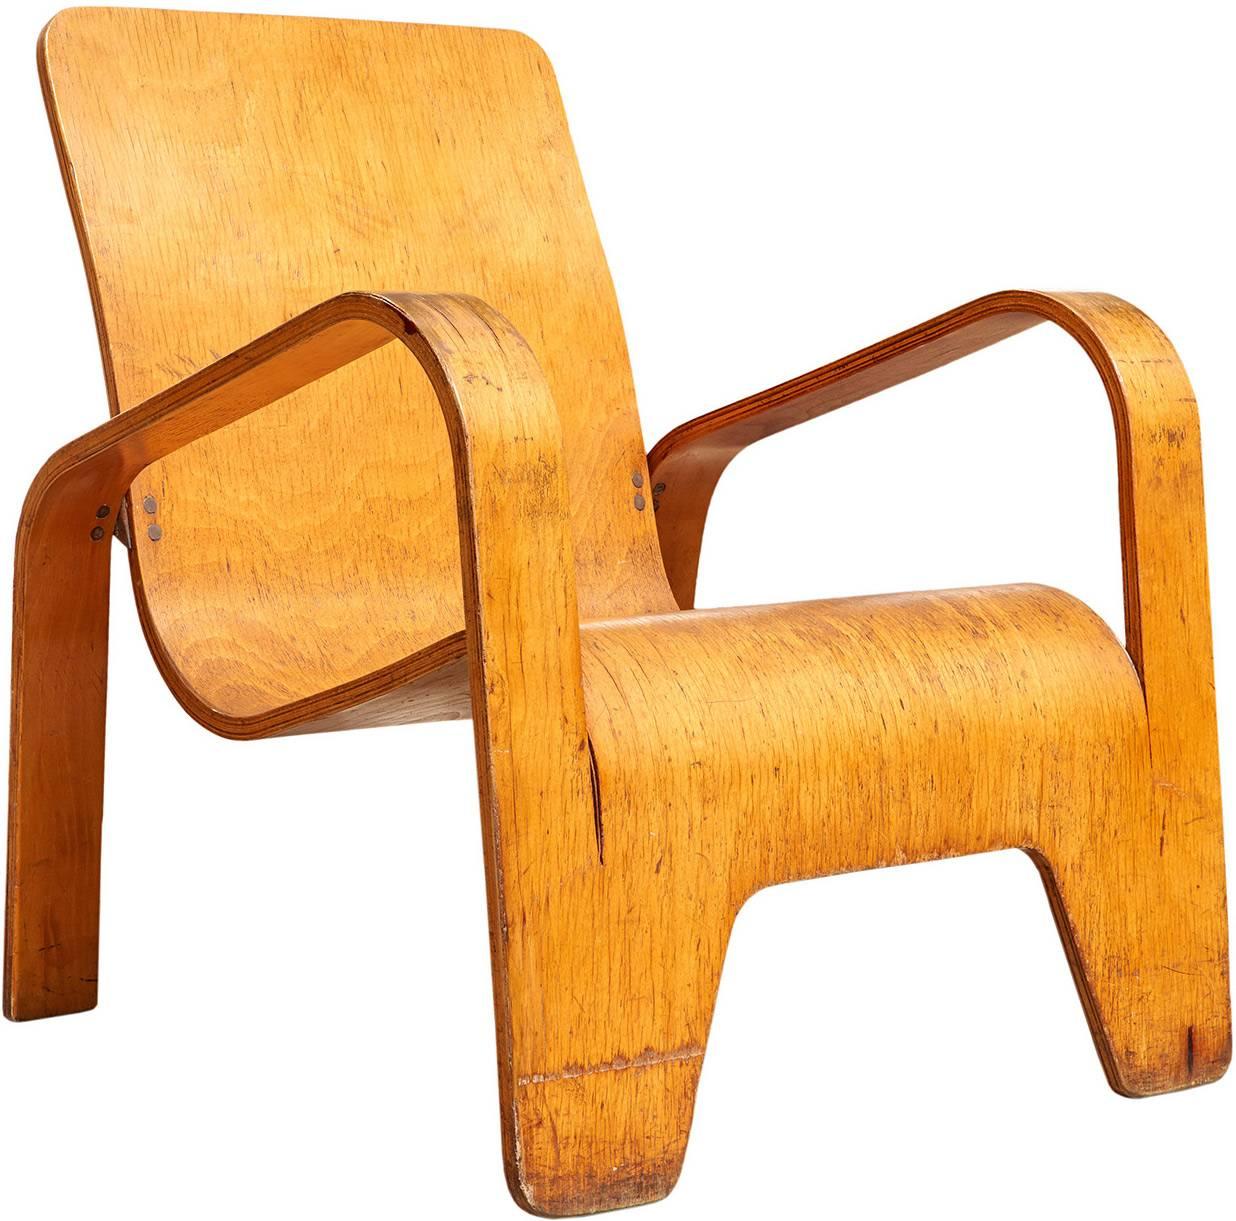 "Lawo" Lounge Chair by Han Pieck For Sale